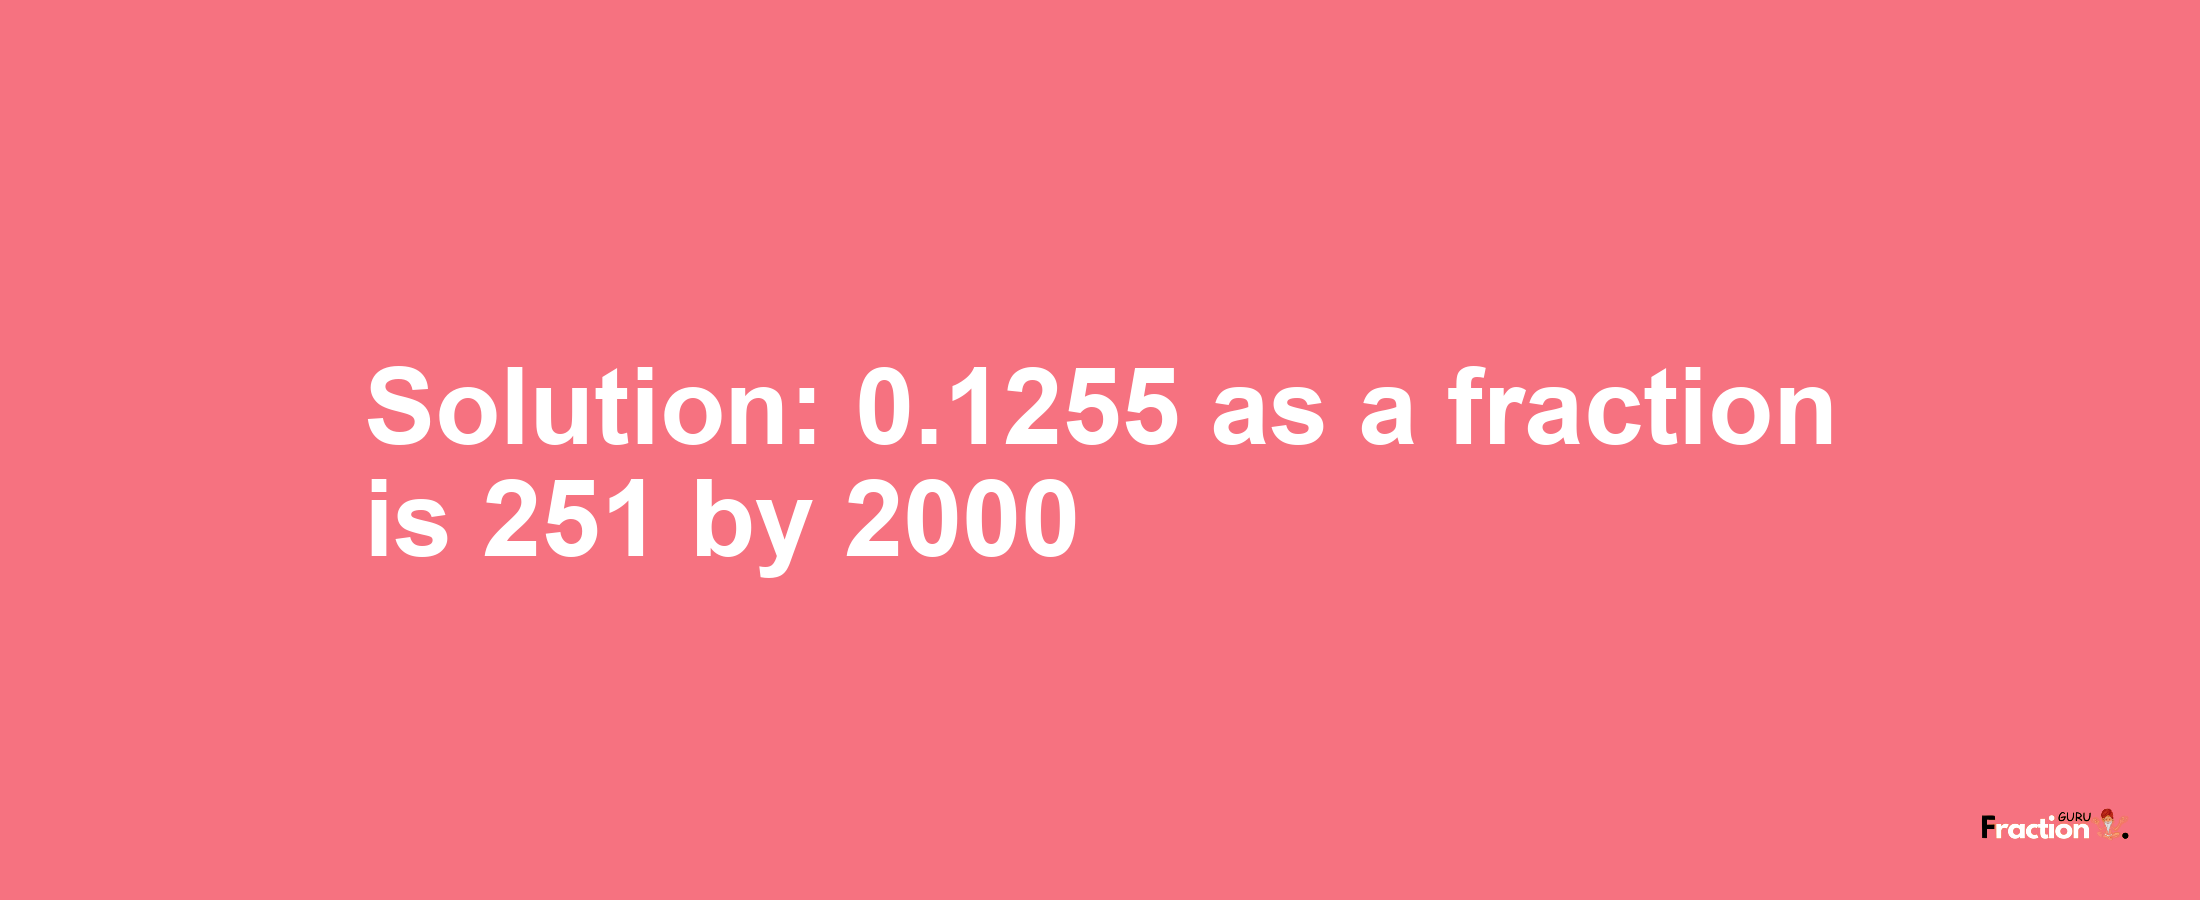 Solution:0.1255 as a fraction is 251/2000